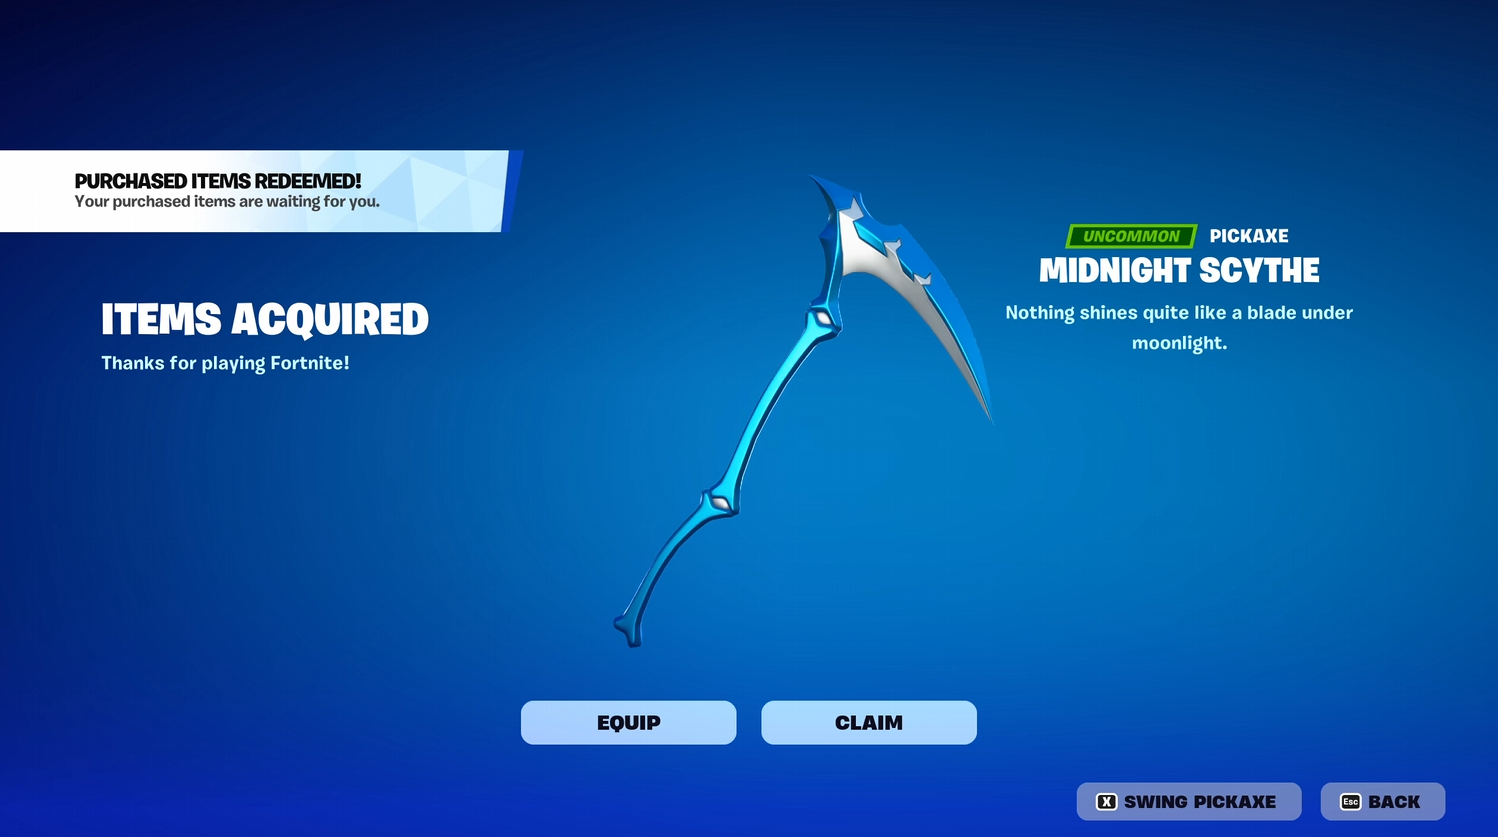 Unlock a Free Pickaxe by Redeeming V-Bucks Cards in Fortnite